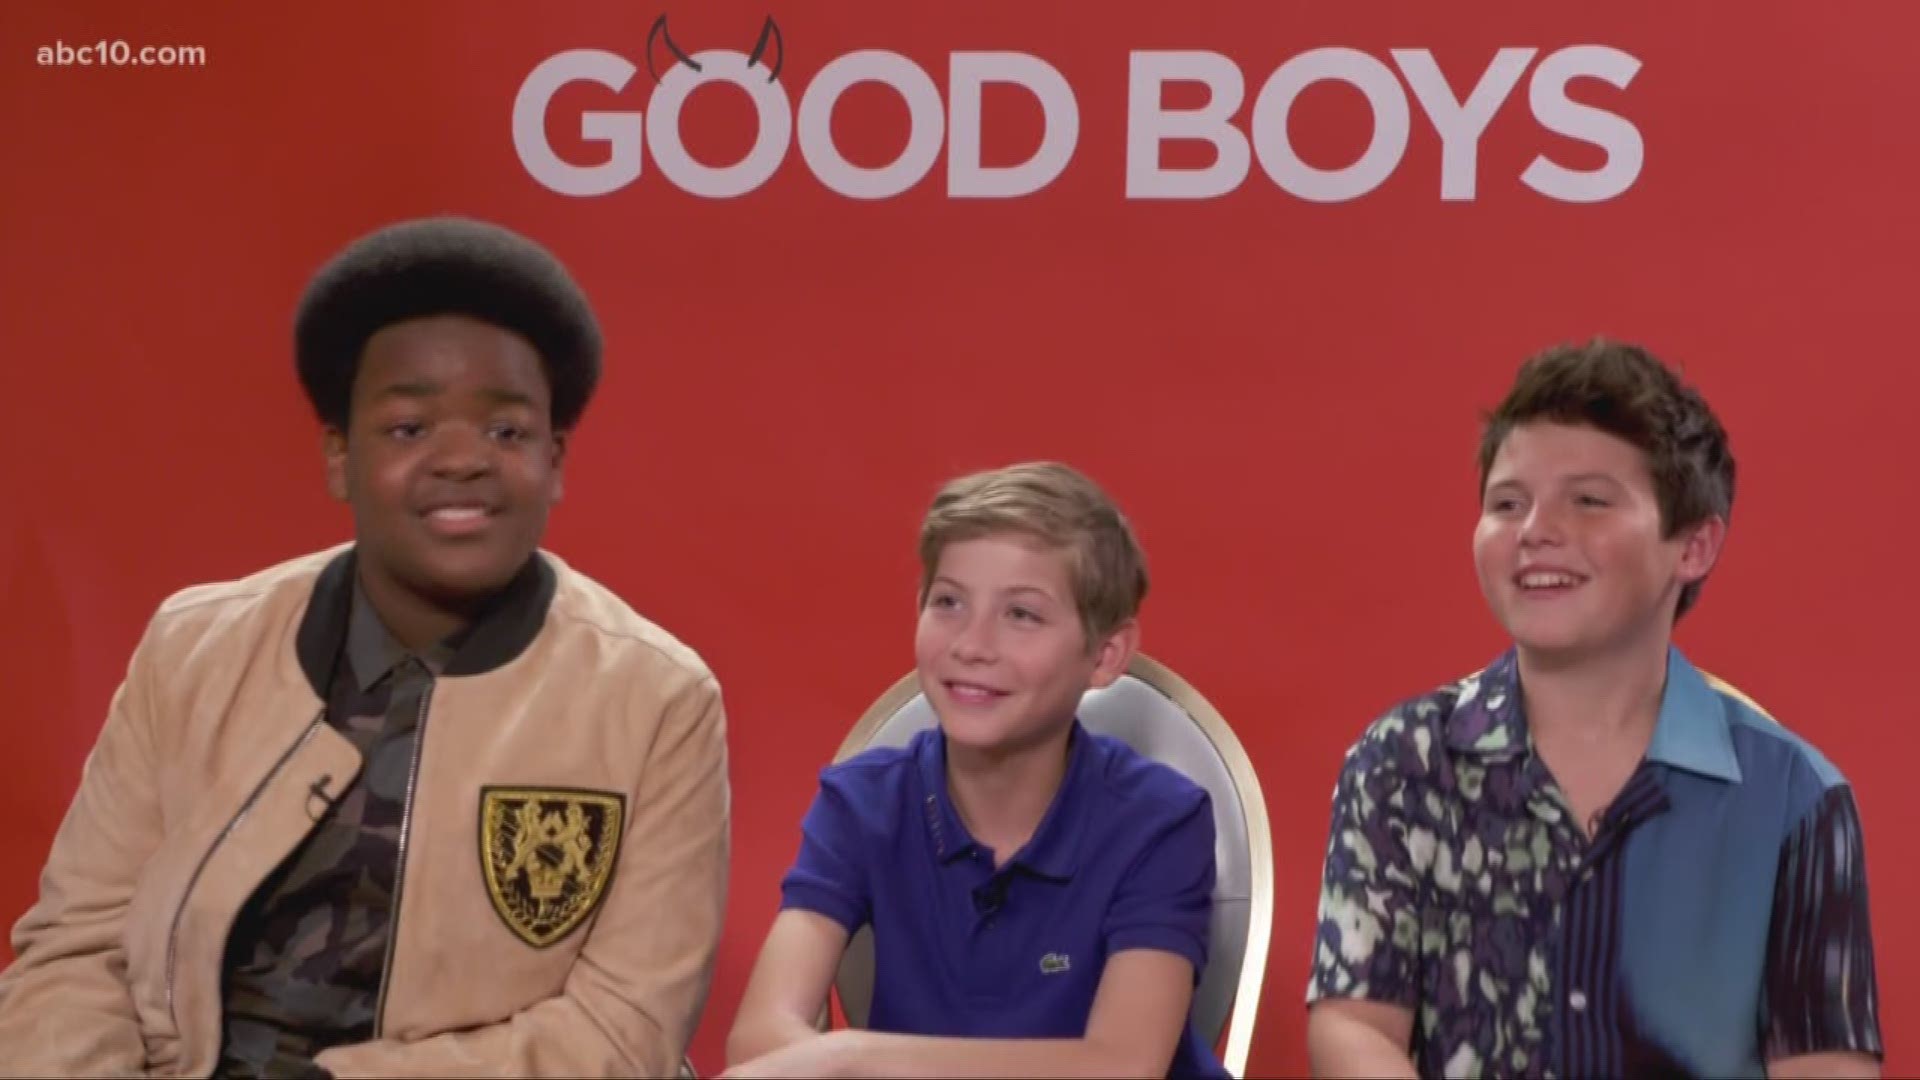 The cast of the new comedy "The Good Boys" talk to Mark S. Allen to talk about their experience filming the raunchy rated-R comedy.